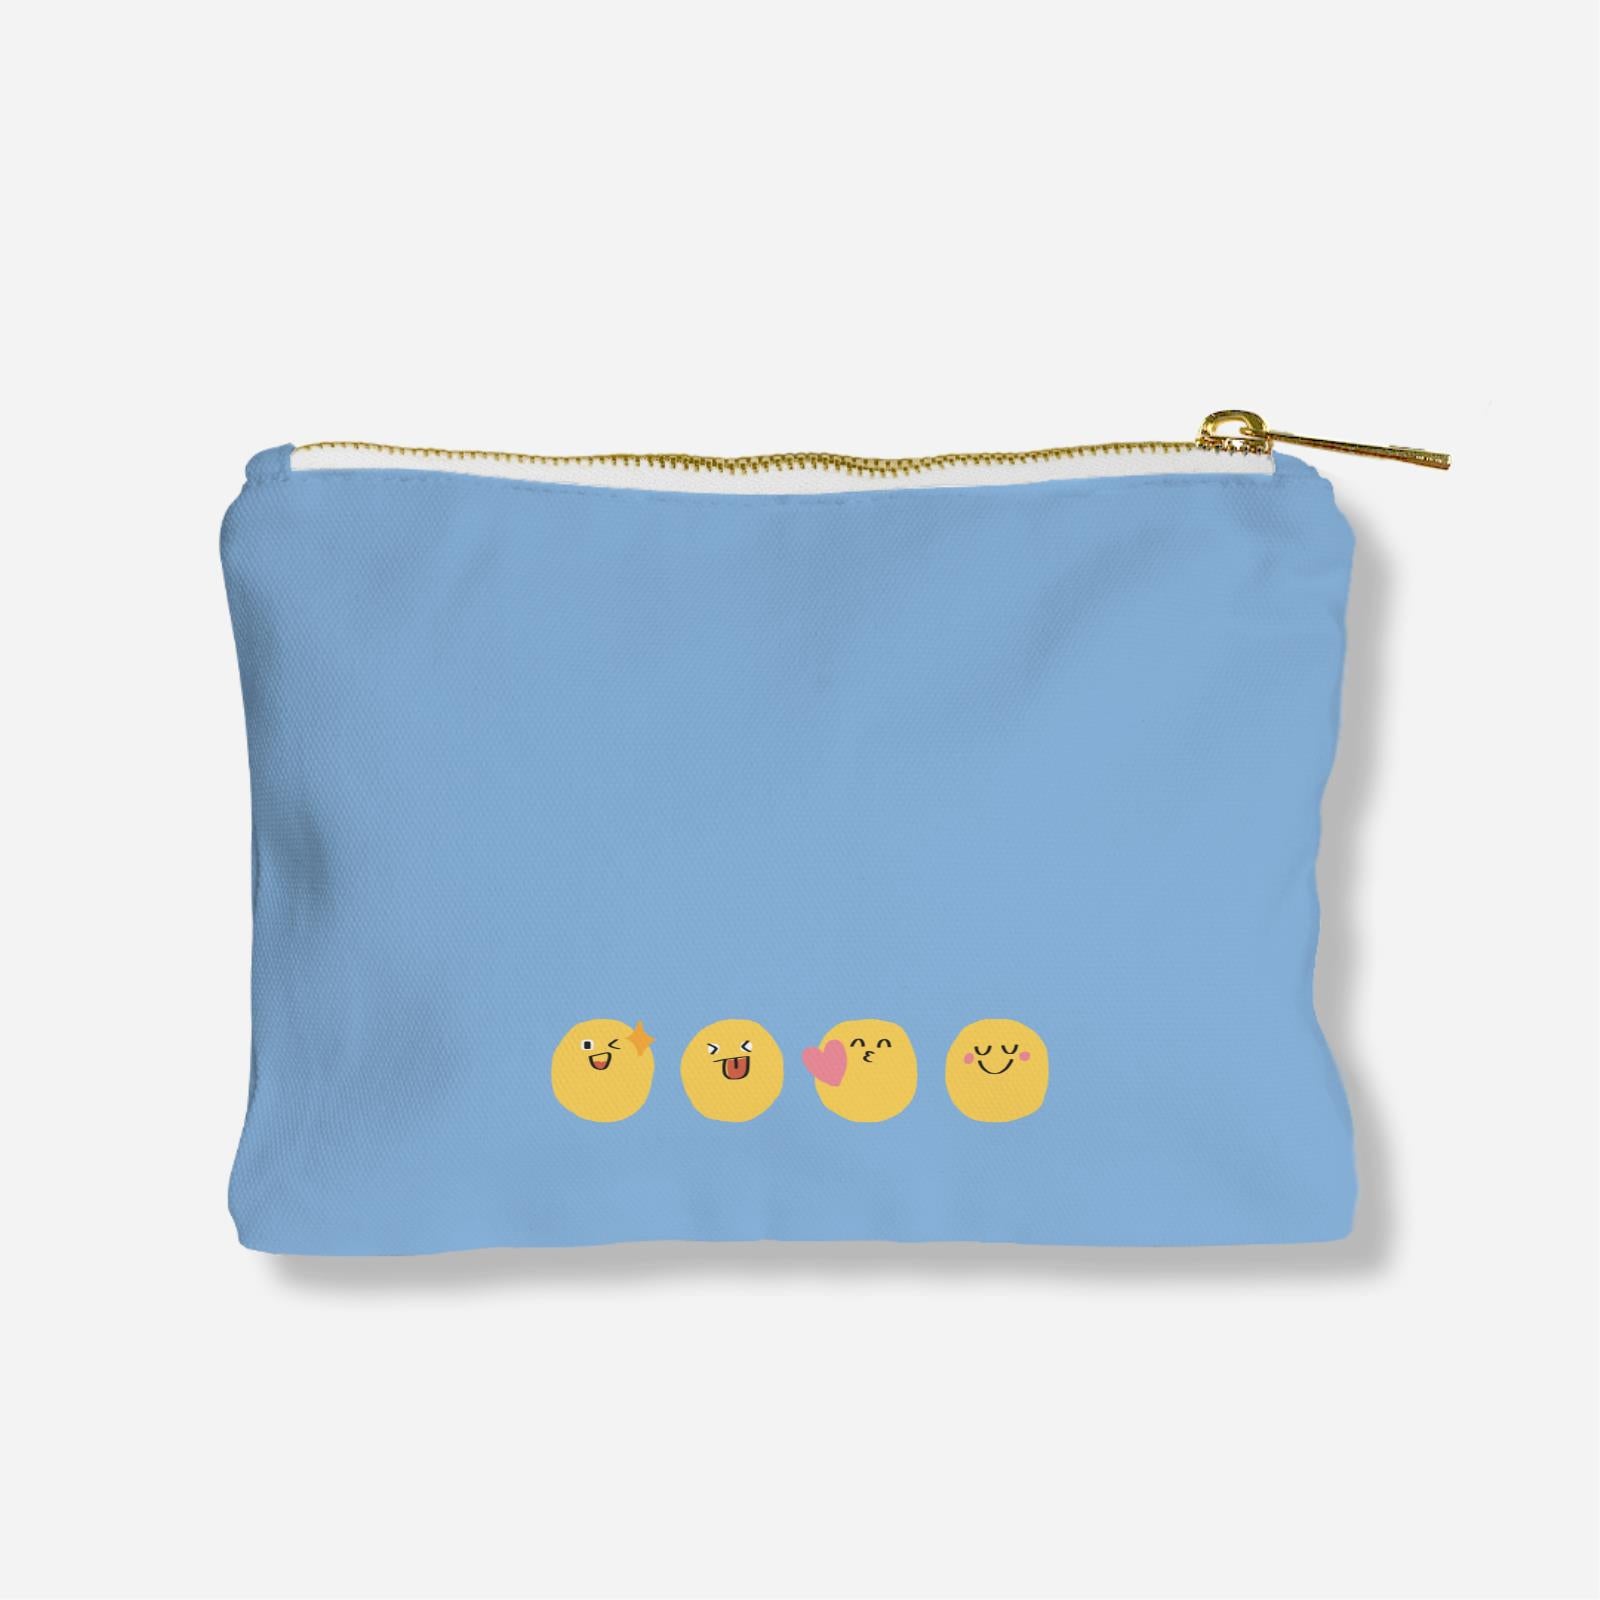 Be Confident Series Zipper Pouch - Stay Positive - Show Your Sunny Side